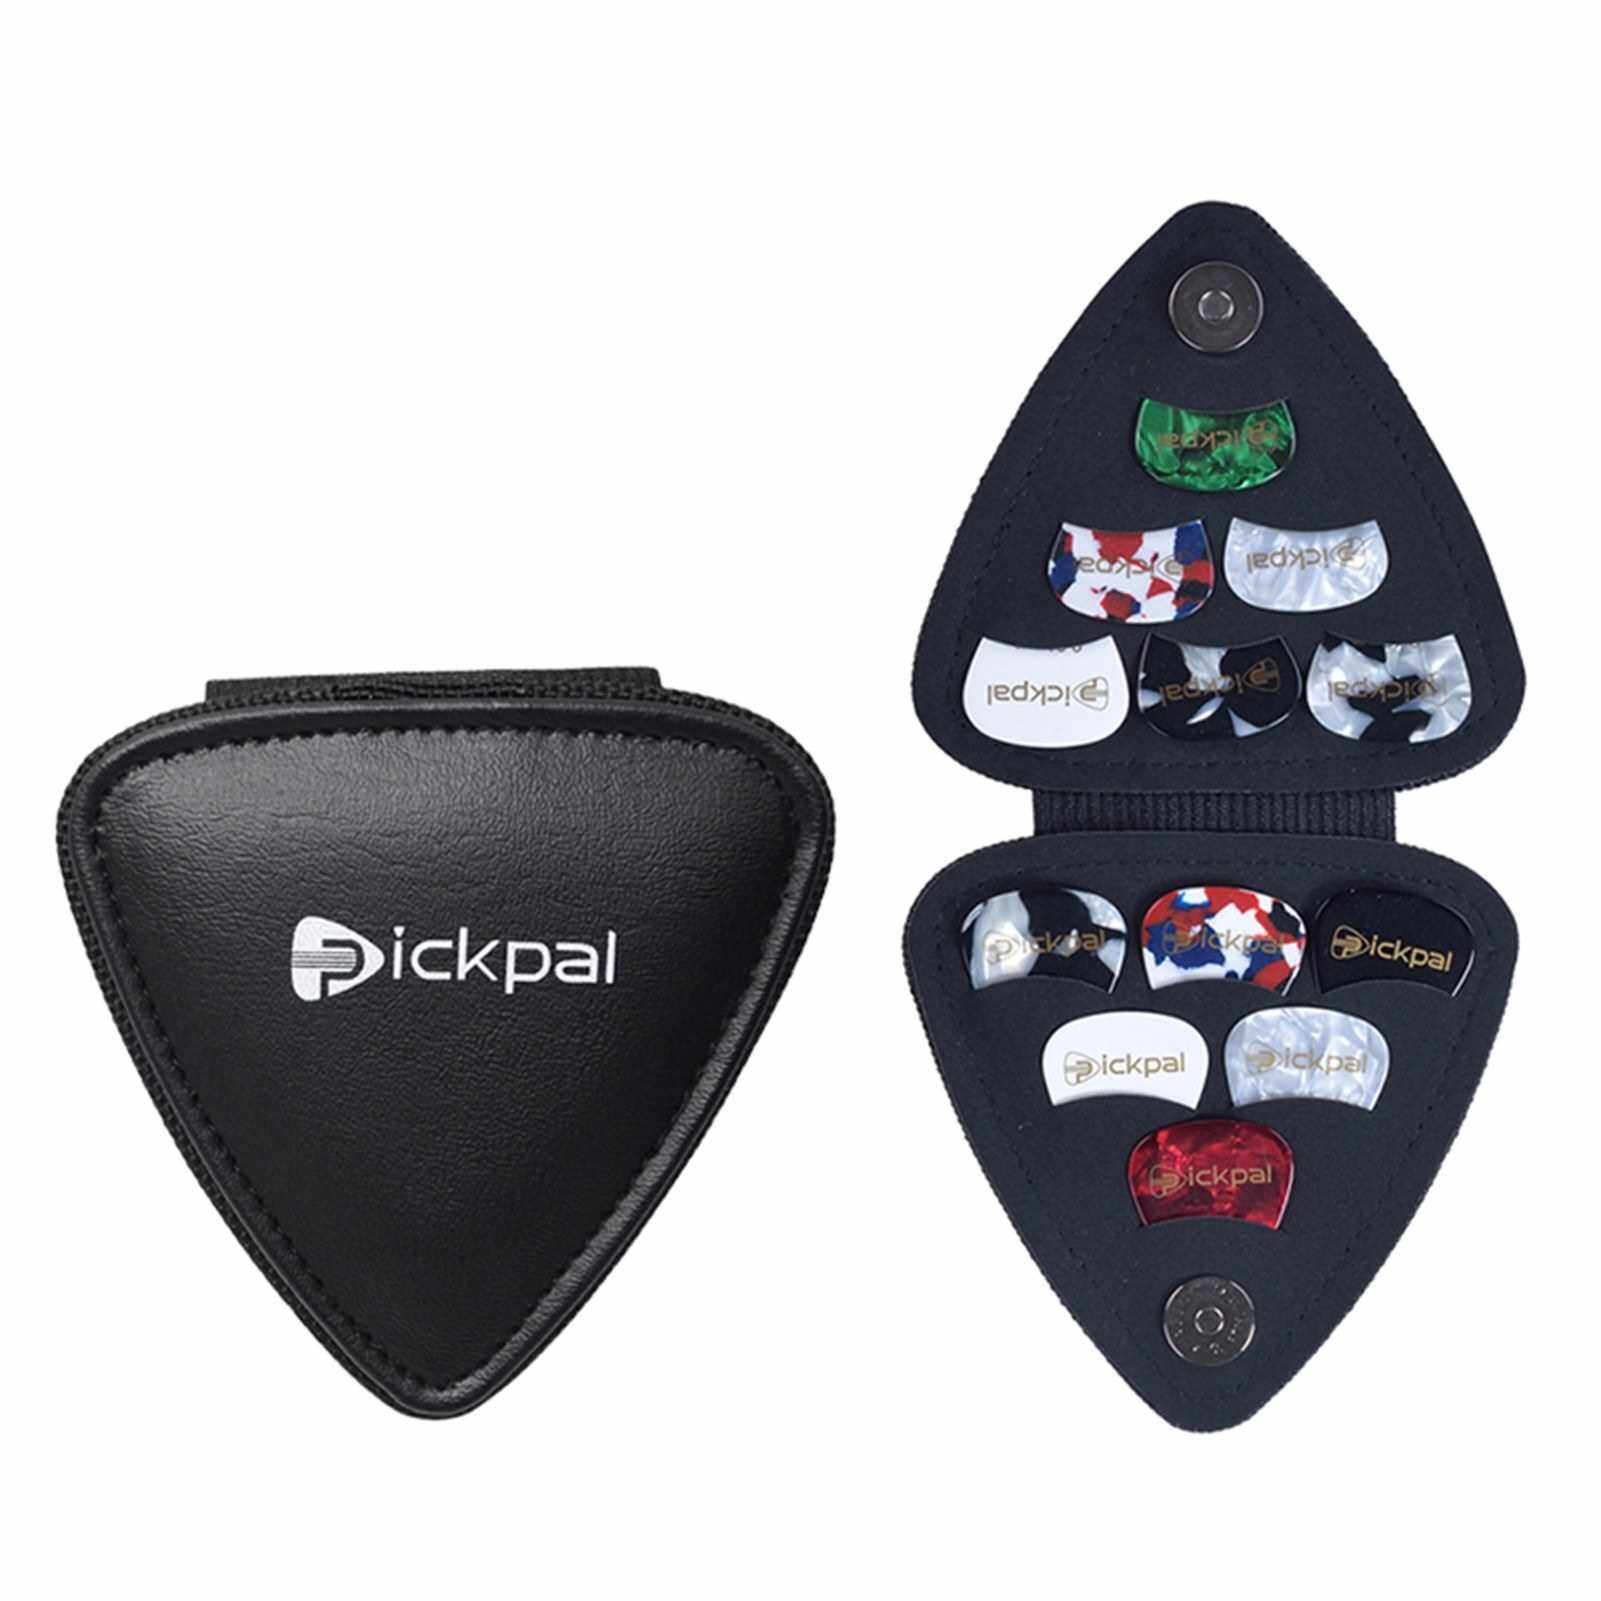 PICKPAL Guitar Picks Holder Case for Acoustic Electric Guitar Includes 12 PCS Guitar Picks Leather Guitar Plectrums Storage Pouch Guitar Pick Bag Gifts for Kids Friends Guitar Players (Standard)